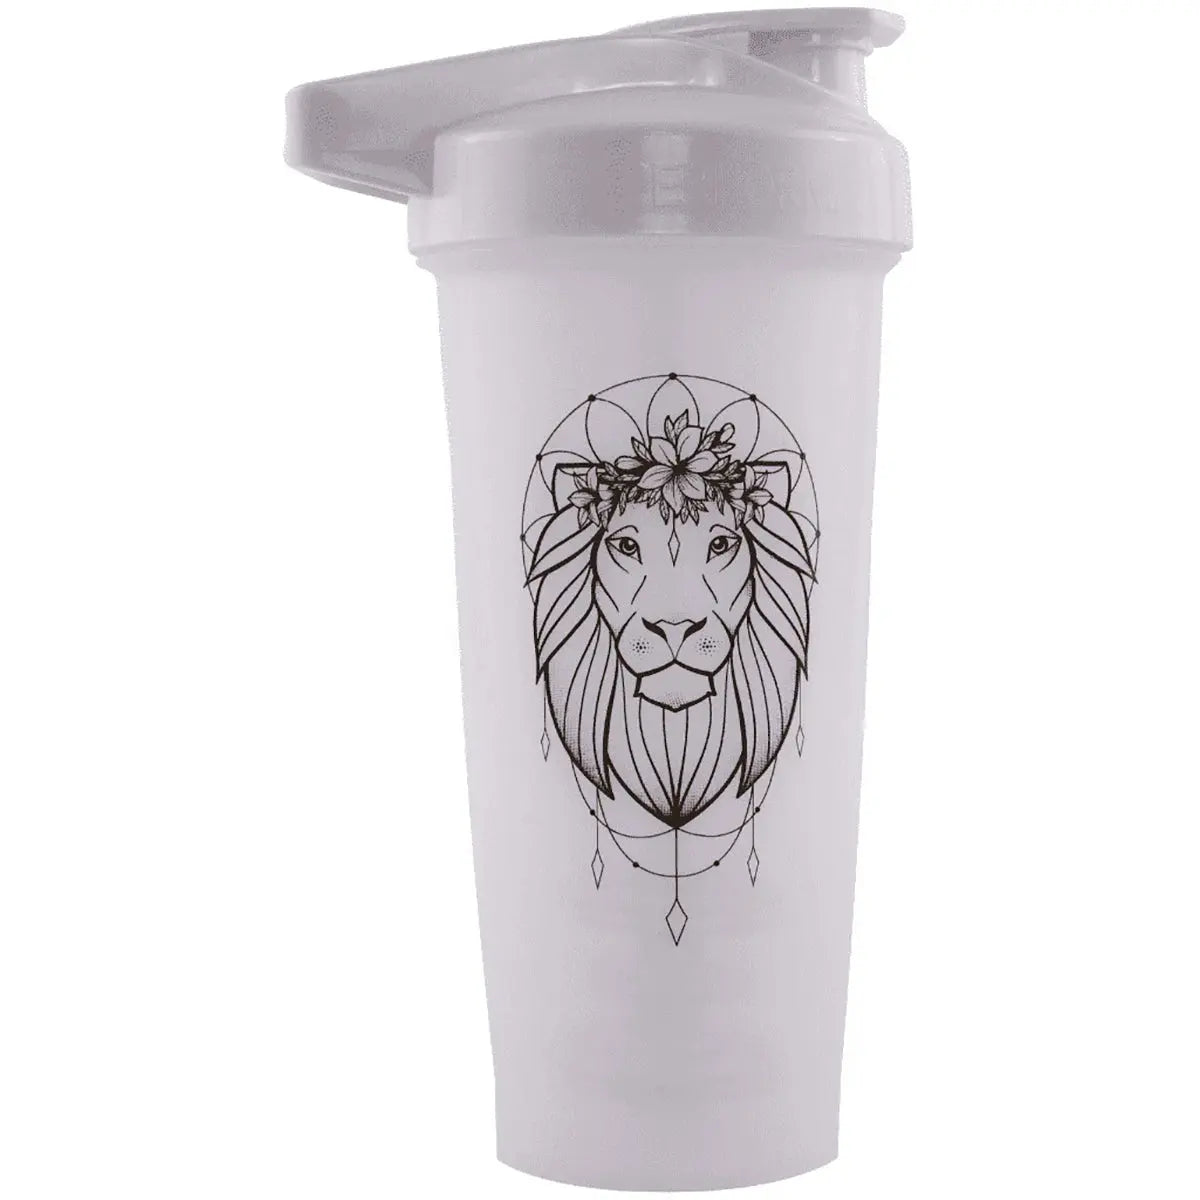 Performa Activ 28 oz. Shaker Cup Gym Bottle - Lioness Performa